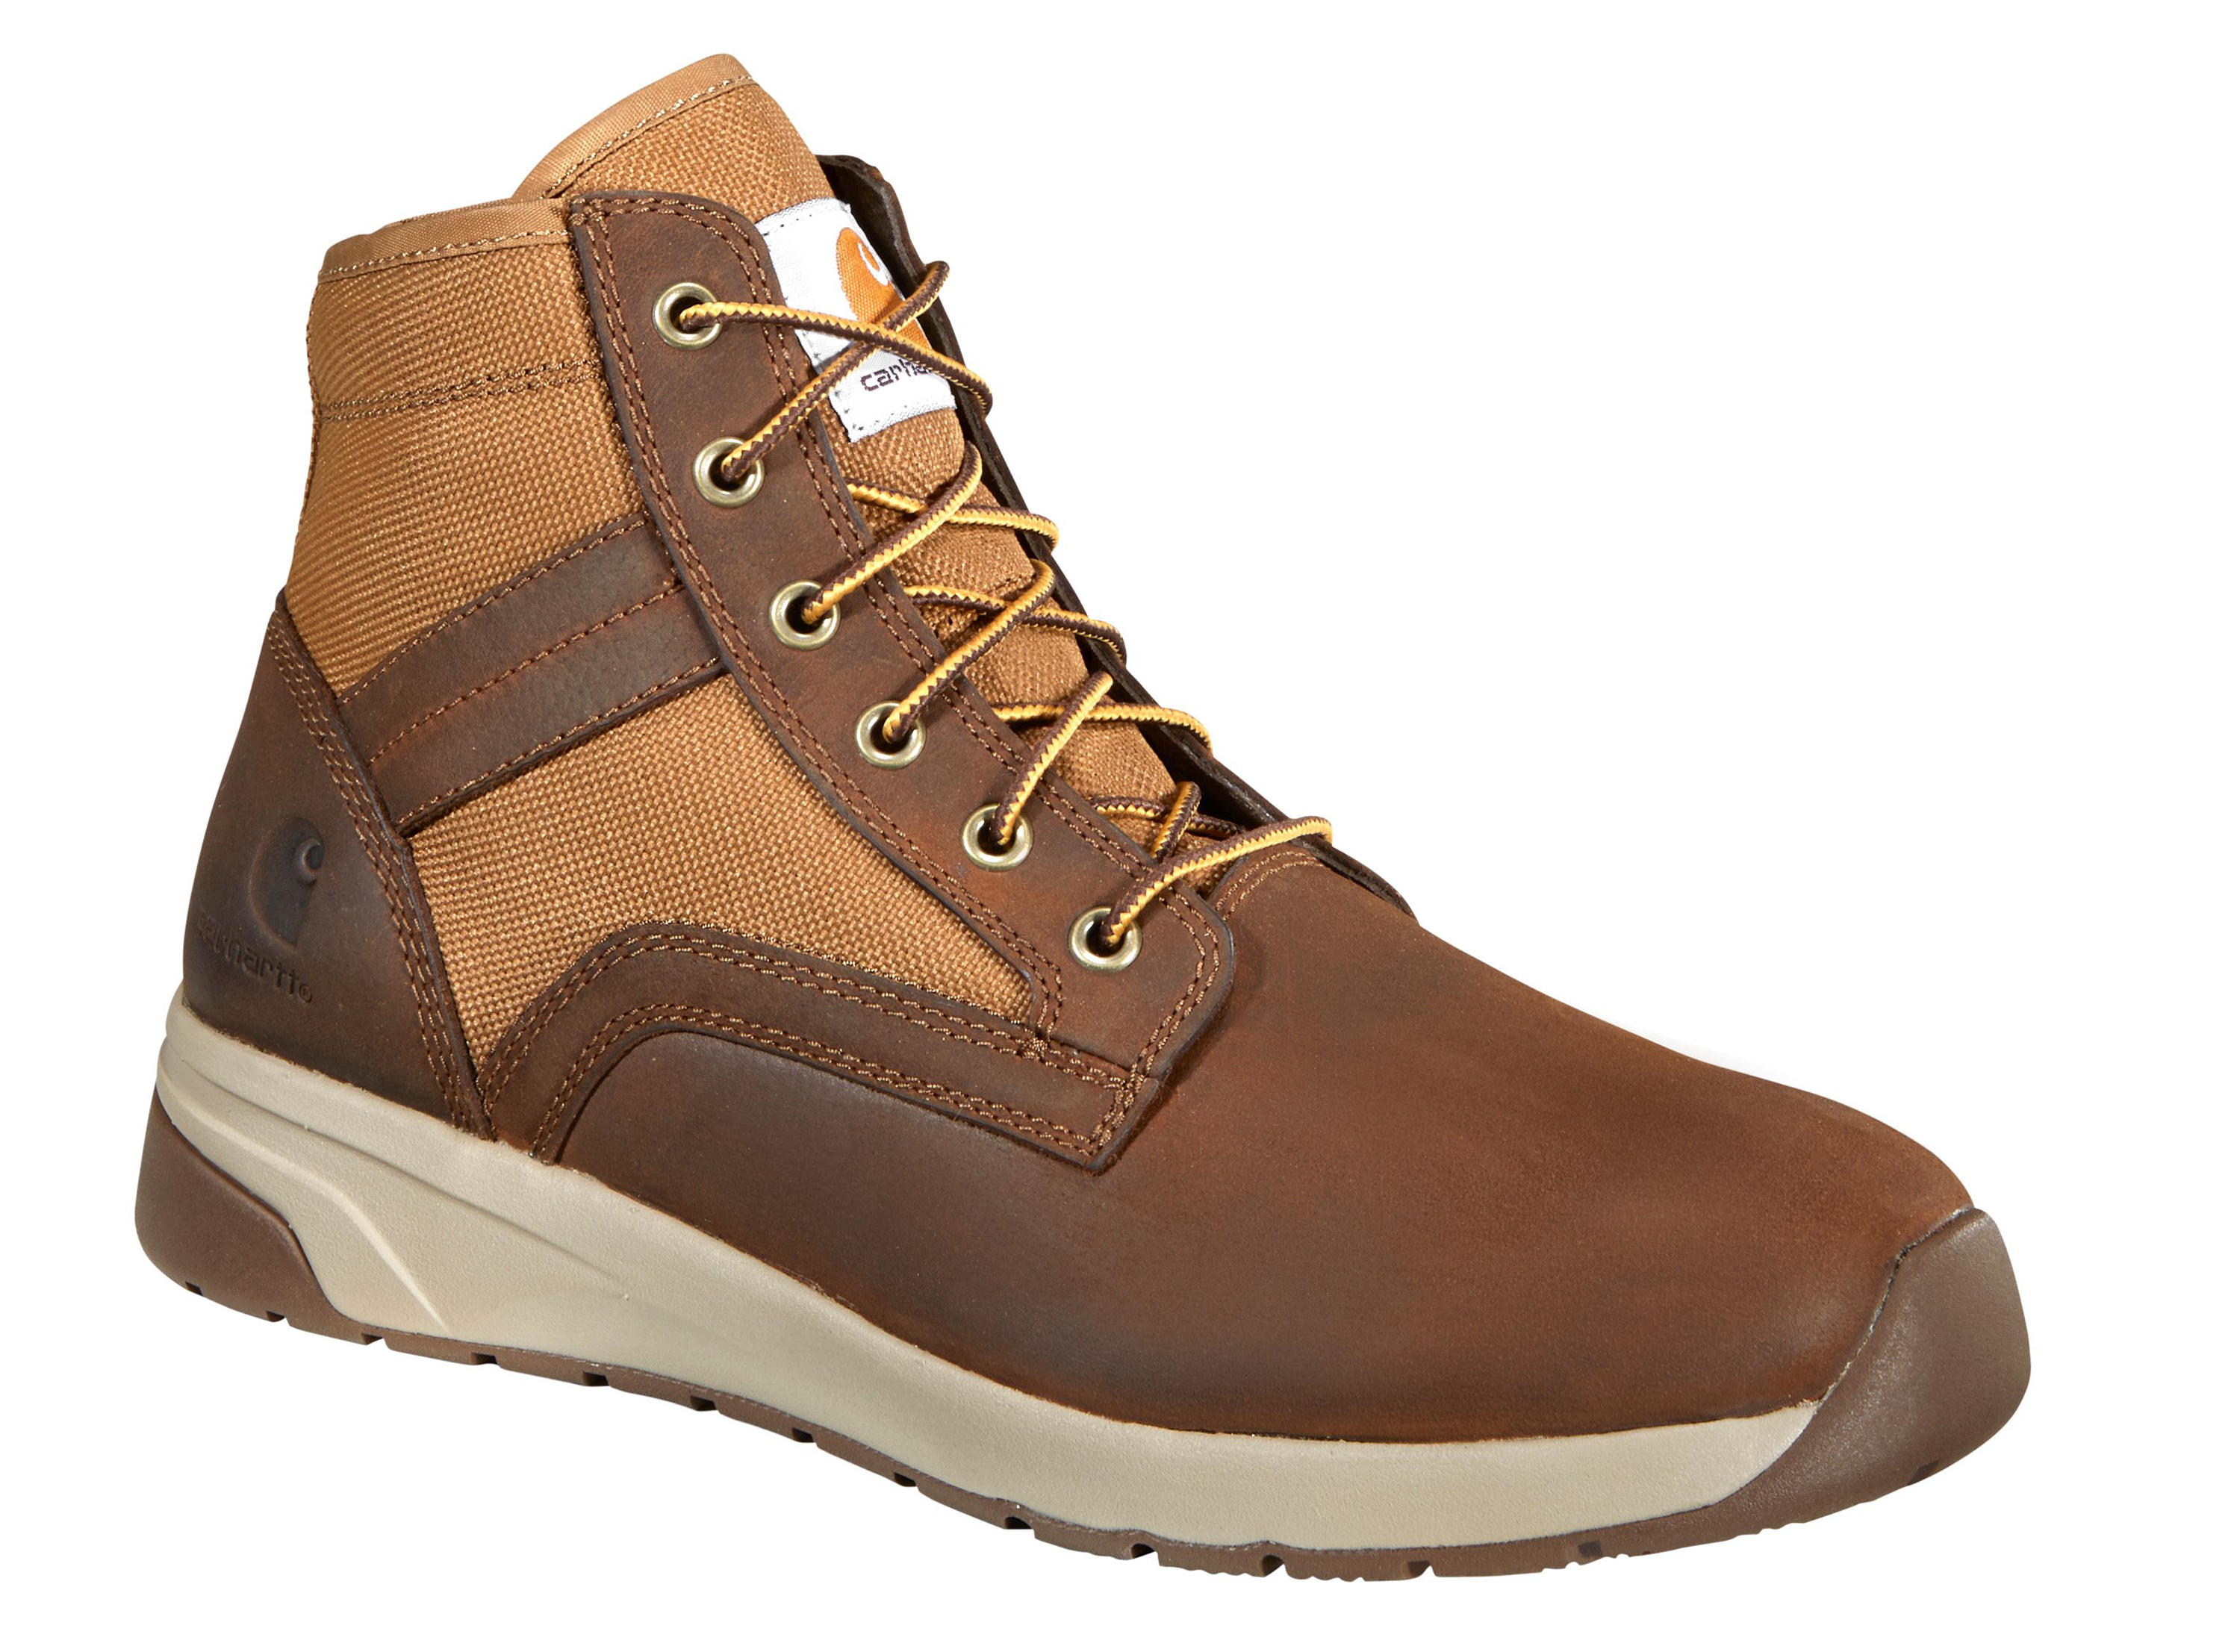 Carhartt Force Leather Composite Toe Sneaker Boots for Men